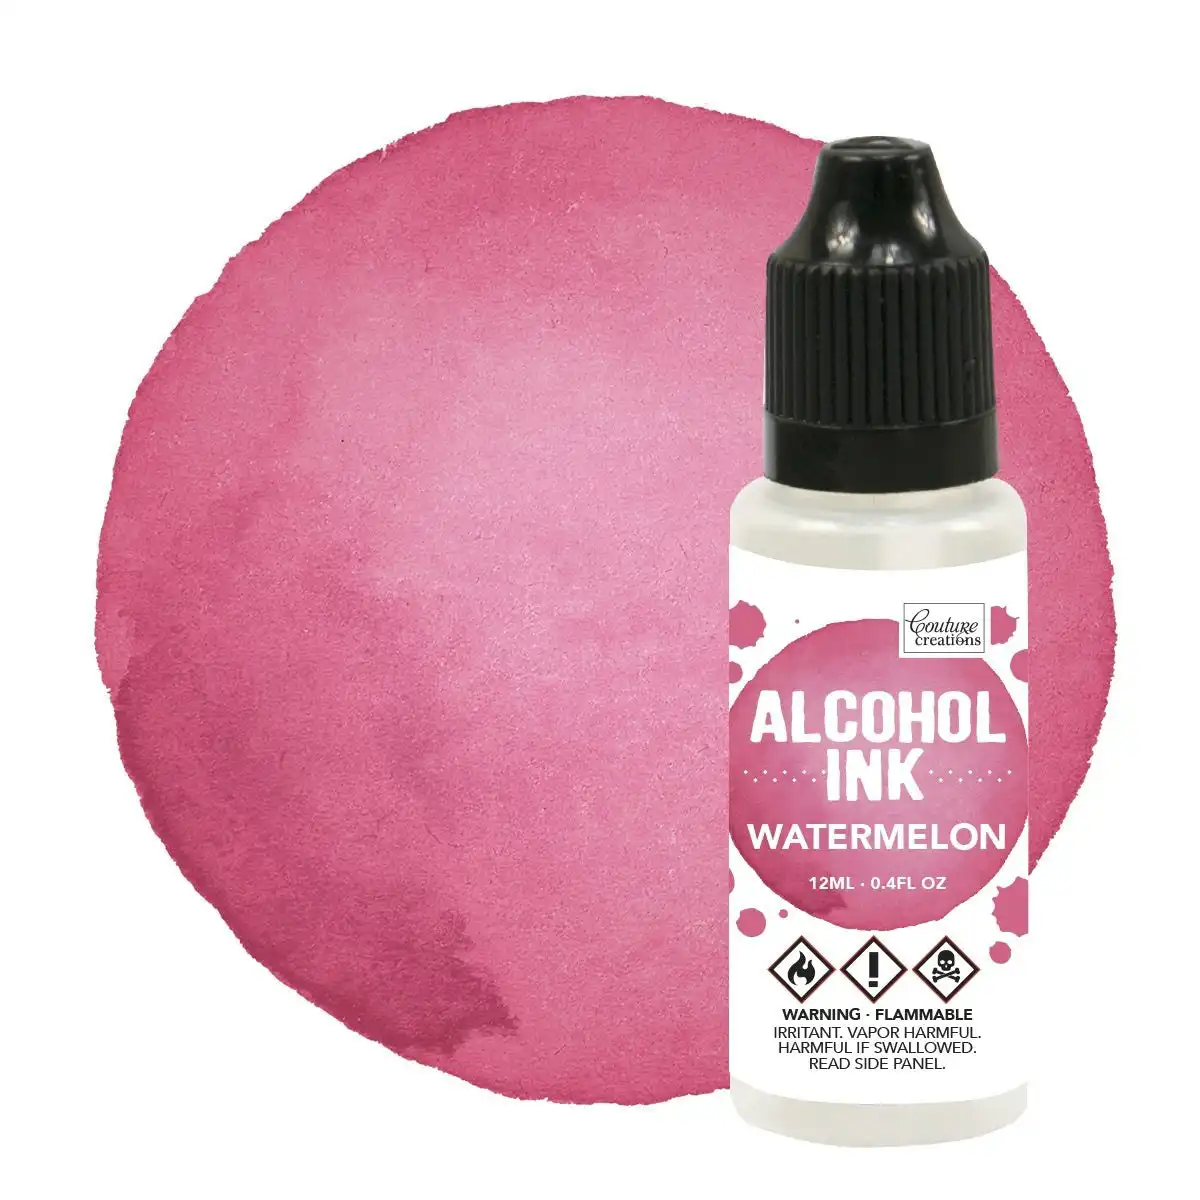 Couture Creations Alcohol Ink - Watermelon (Formerly Named Coral)- 12ml